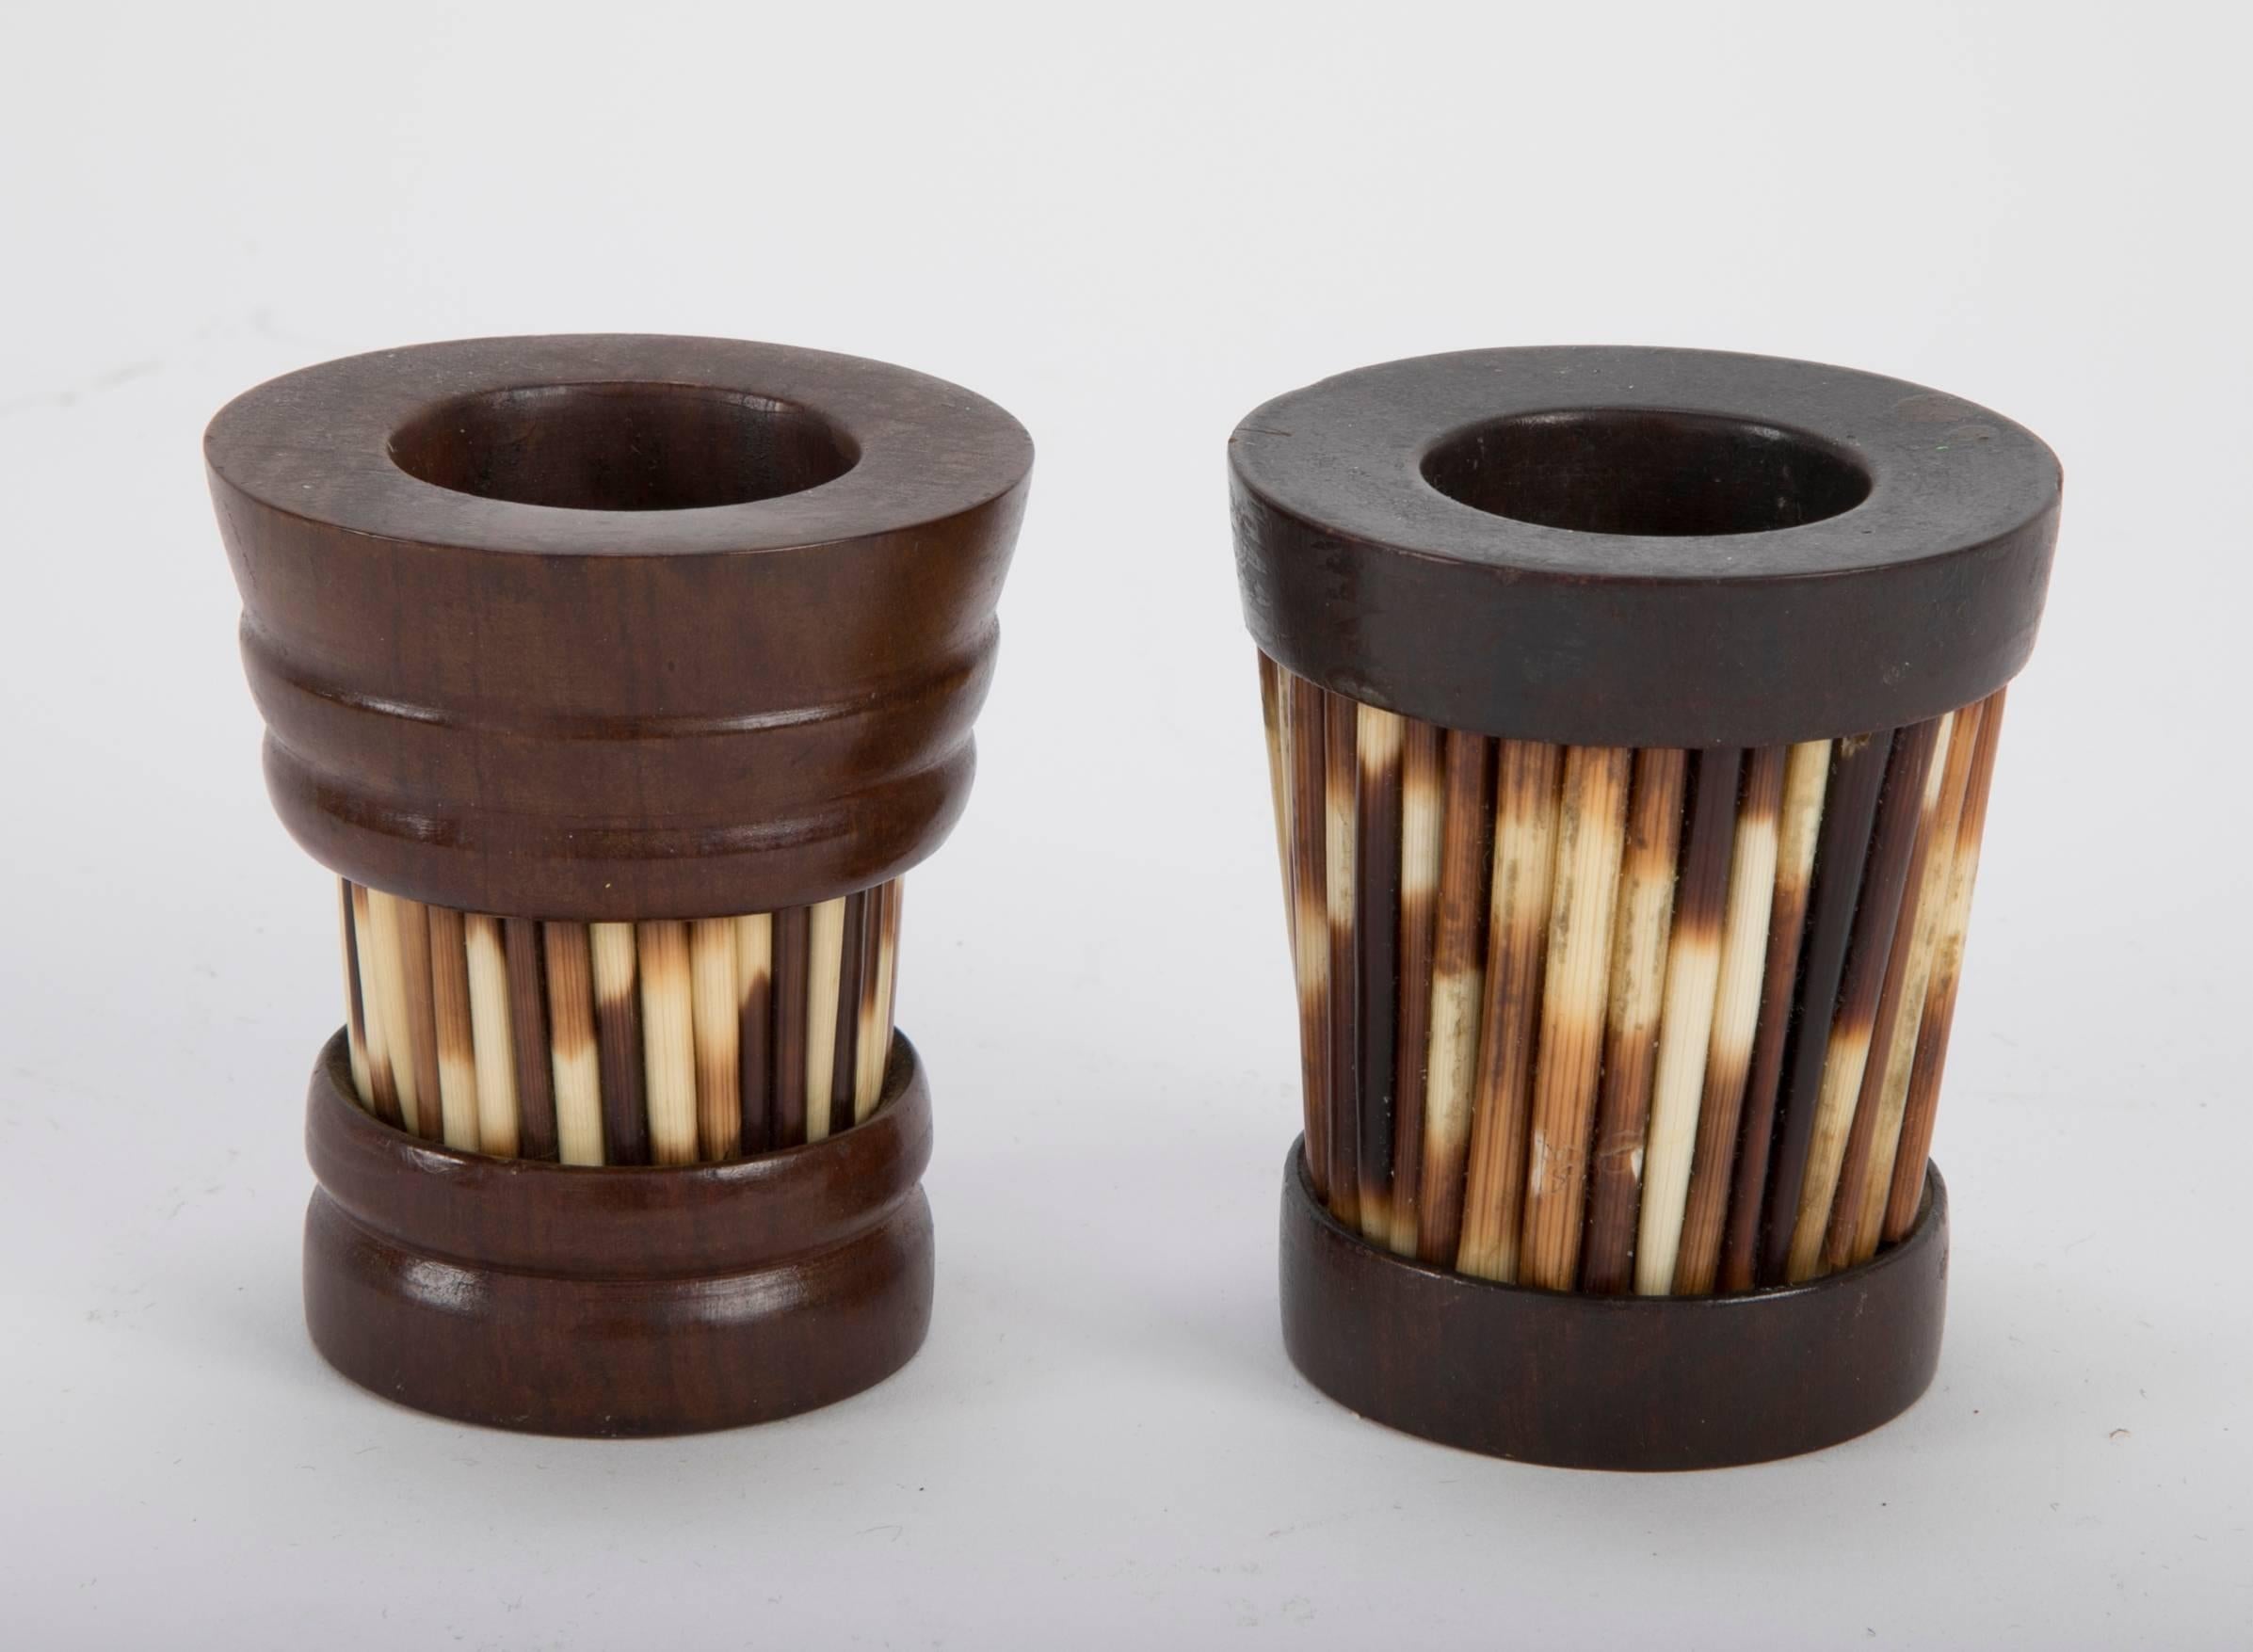 Two rare Anglo Indian porcupine quill and mahogany match holders. Made in colonial Ceylon, present day Sri Lanka. 

Part of a group of seven quill items we recently acquired, the group includes three boxes a basket a frame and two match holders.